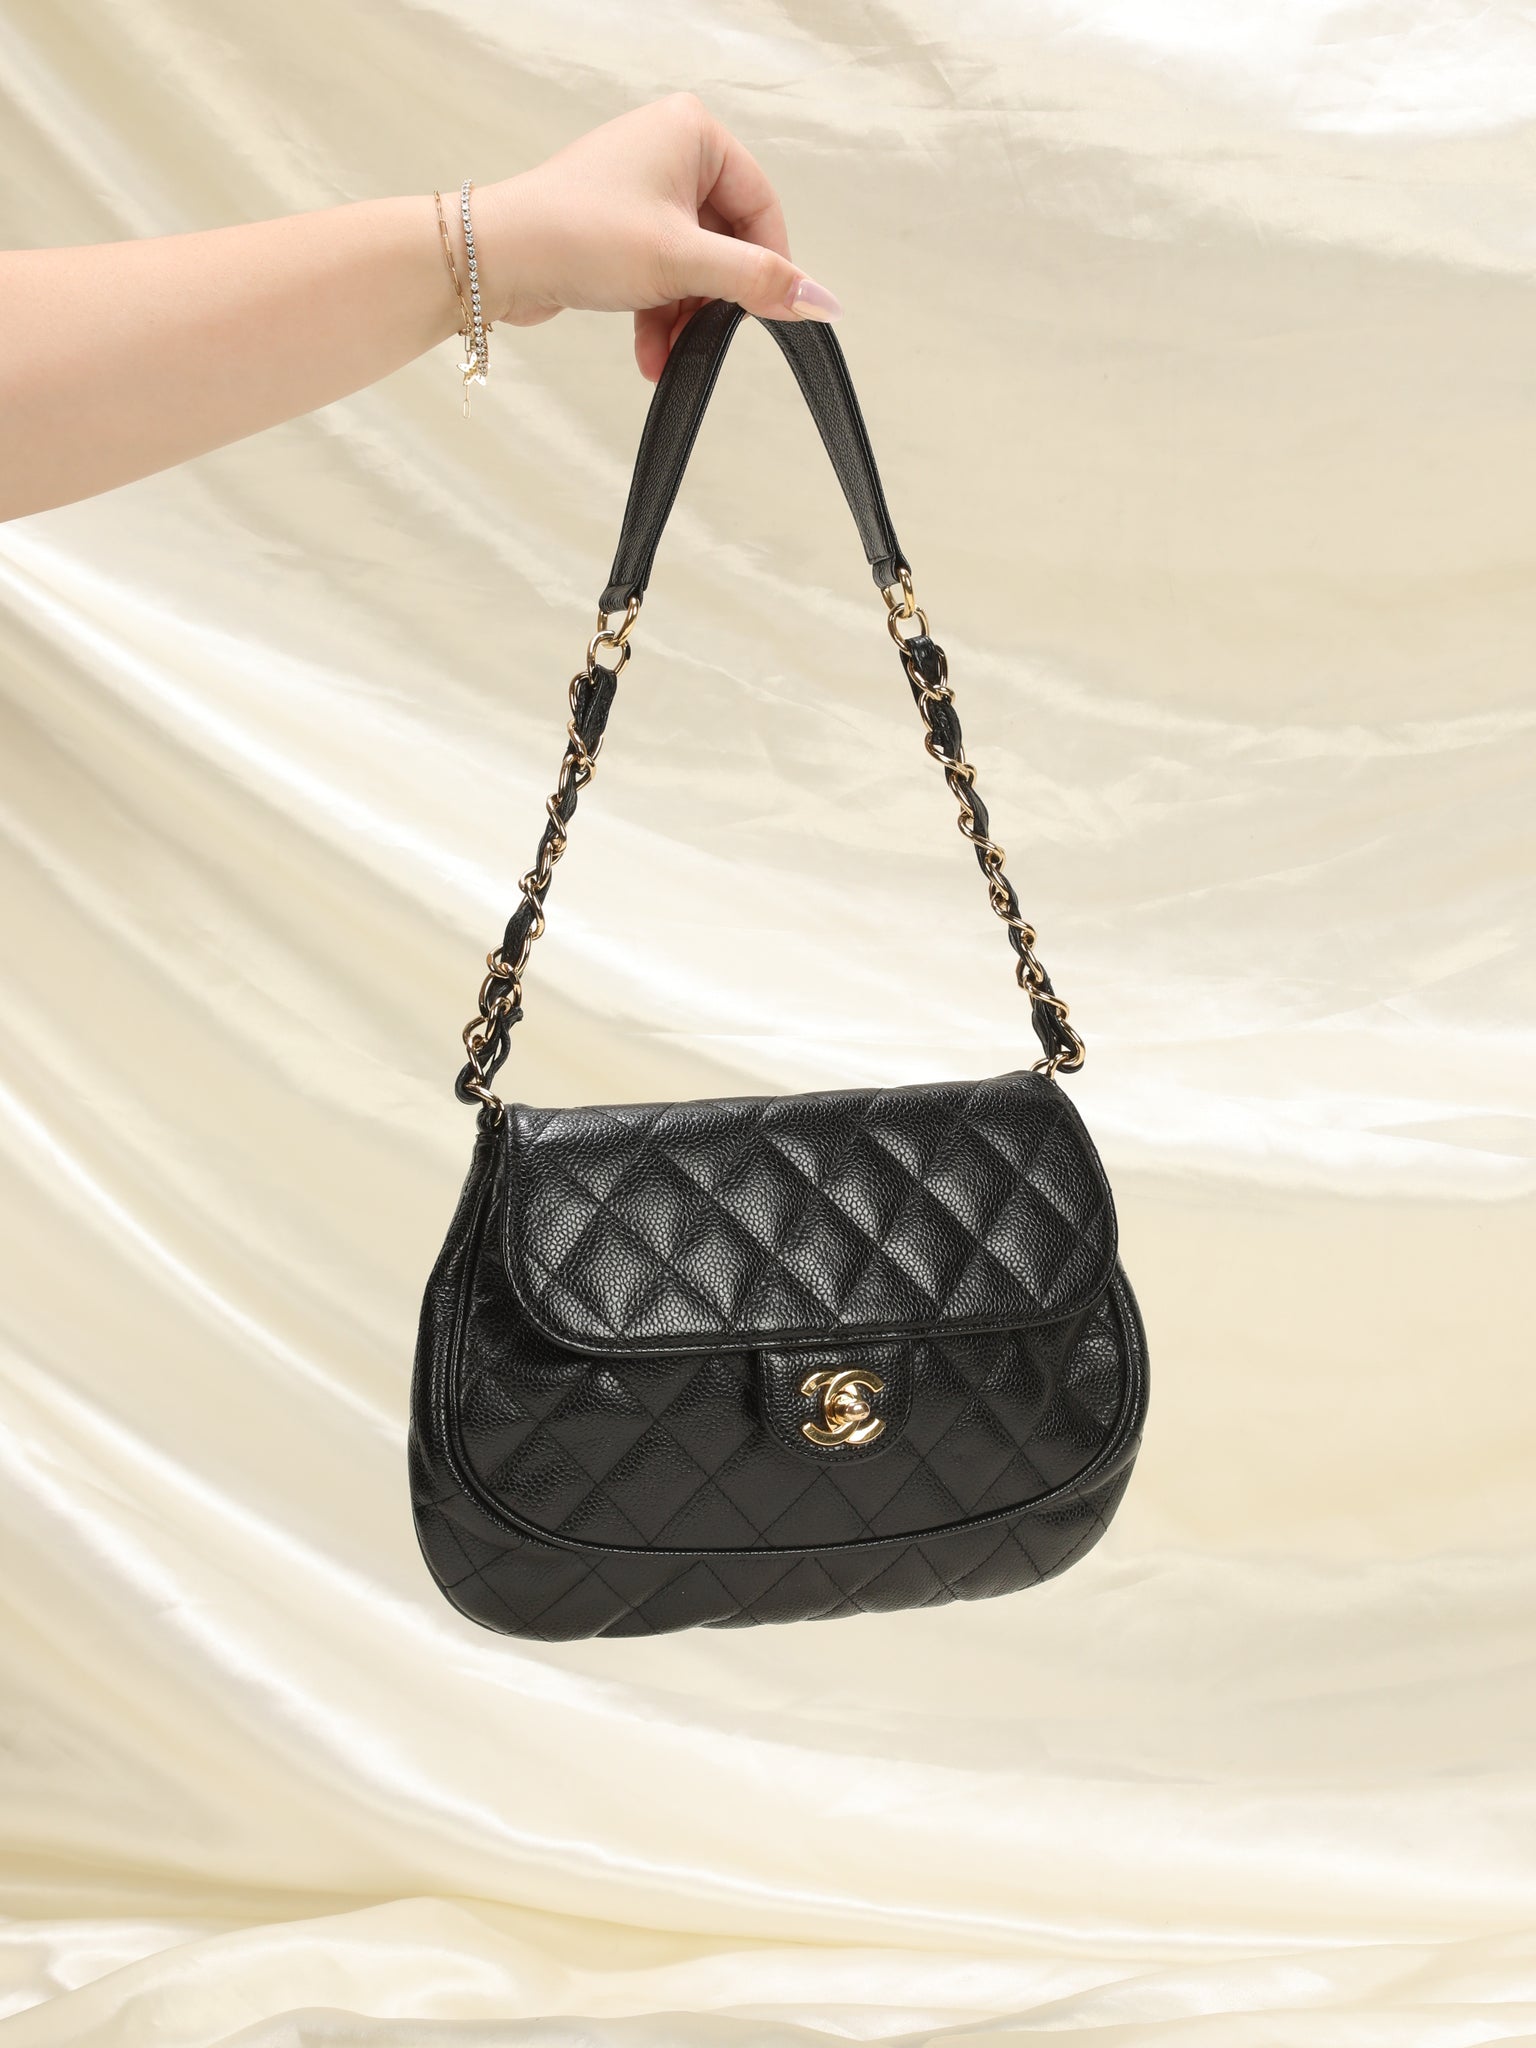 CHANEL Caviar Shoulder Bags for Women, Authenticity Guaranteed